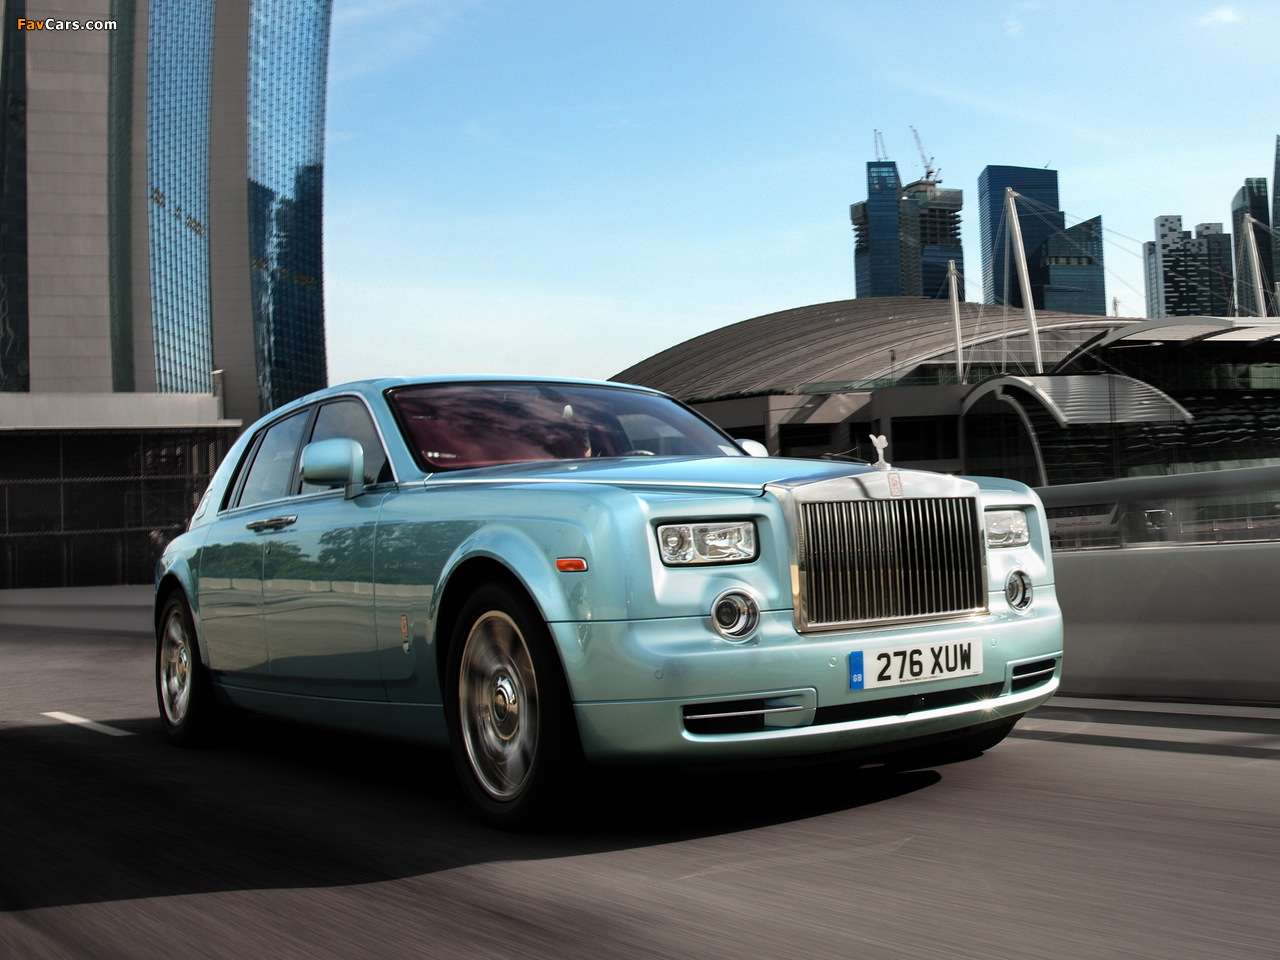 Rolls-Royce 102EX Electric Concept 2011 images (1280 x 960)